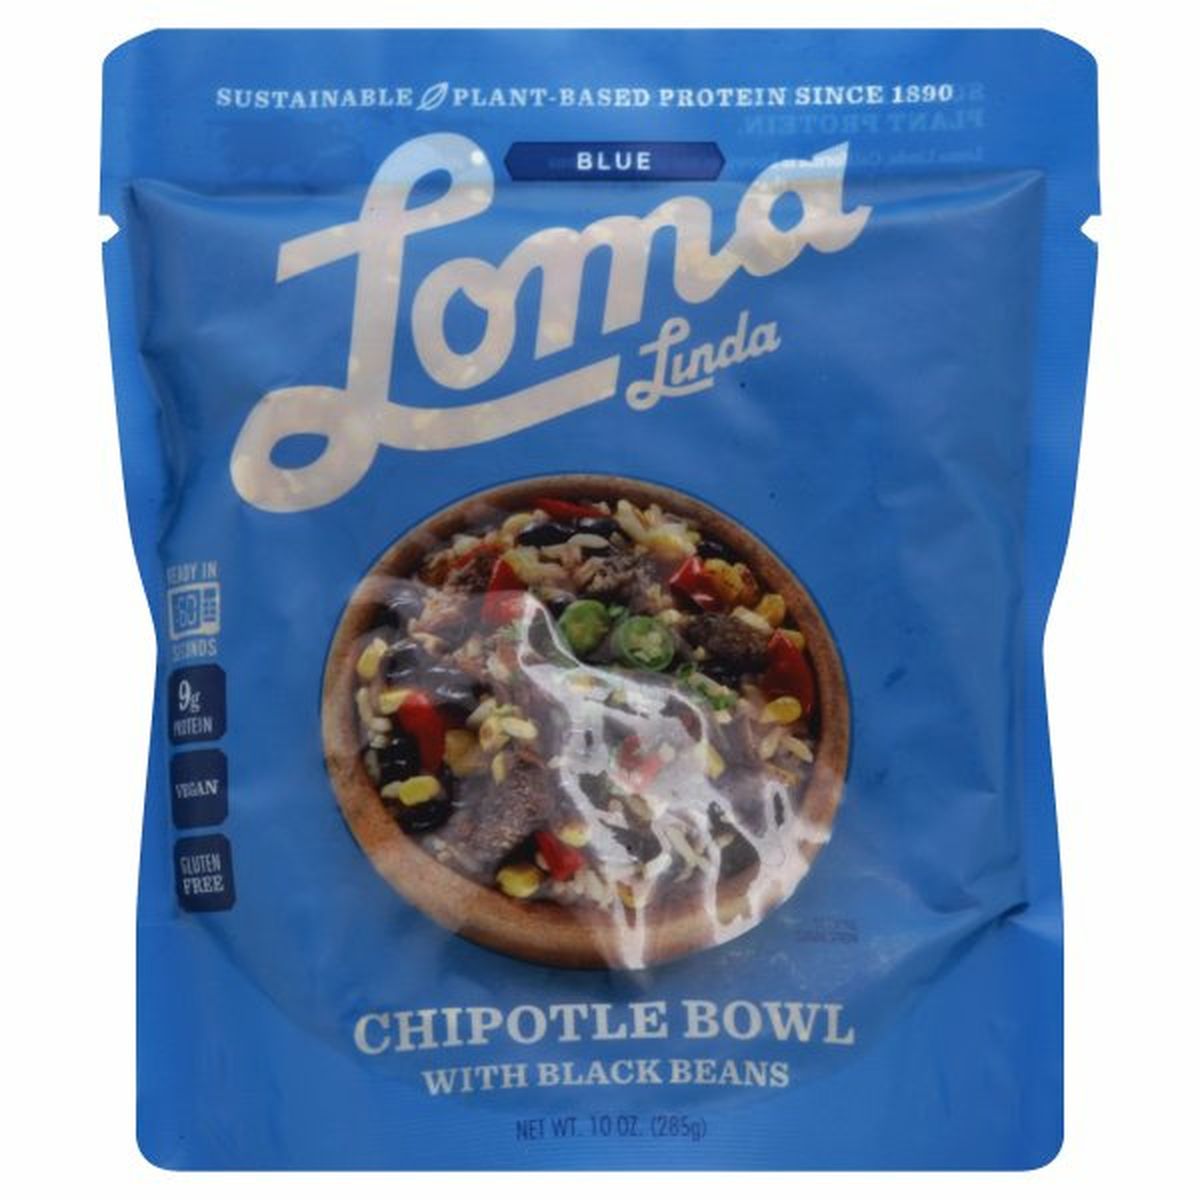 Calories in Loma Linda Chipotle Bowl, with Black Beans, Blue